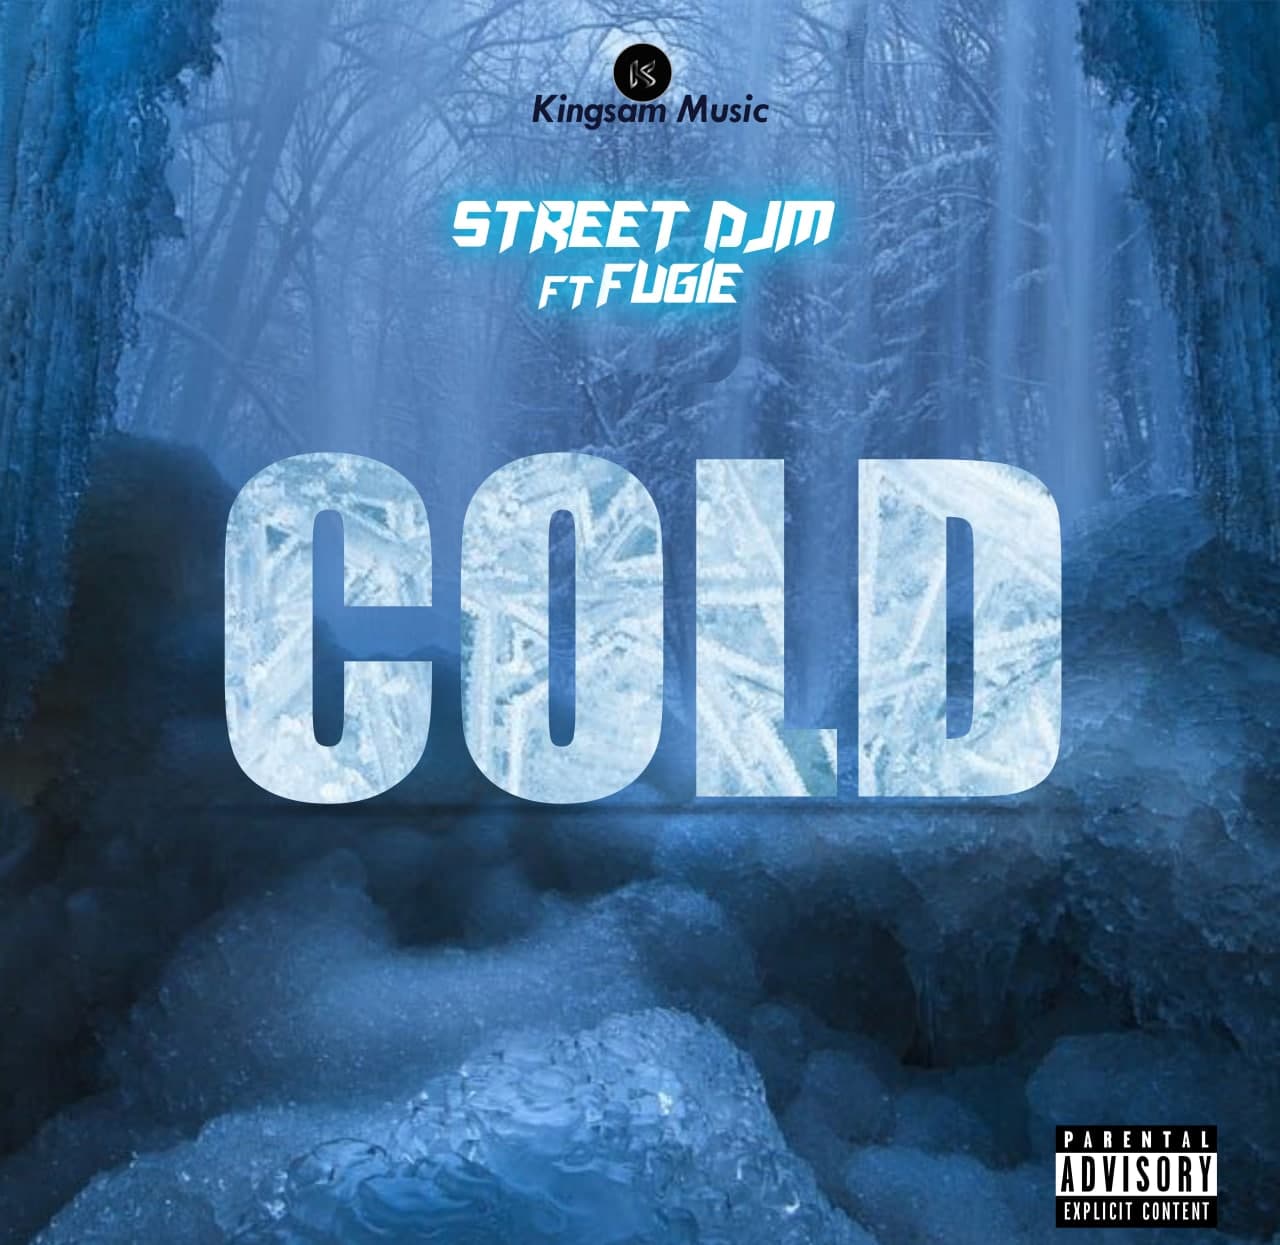 Cold mp3. Cold as Ice.